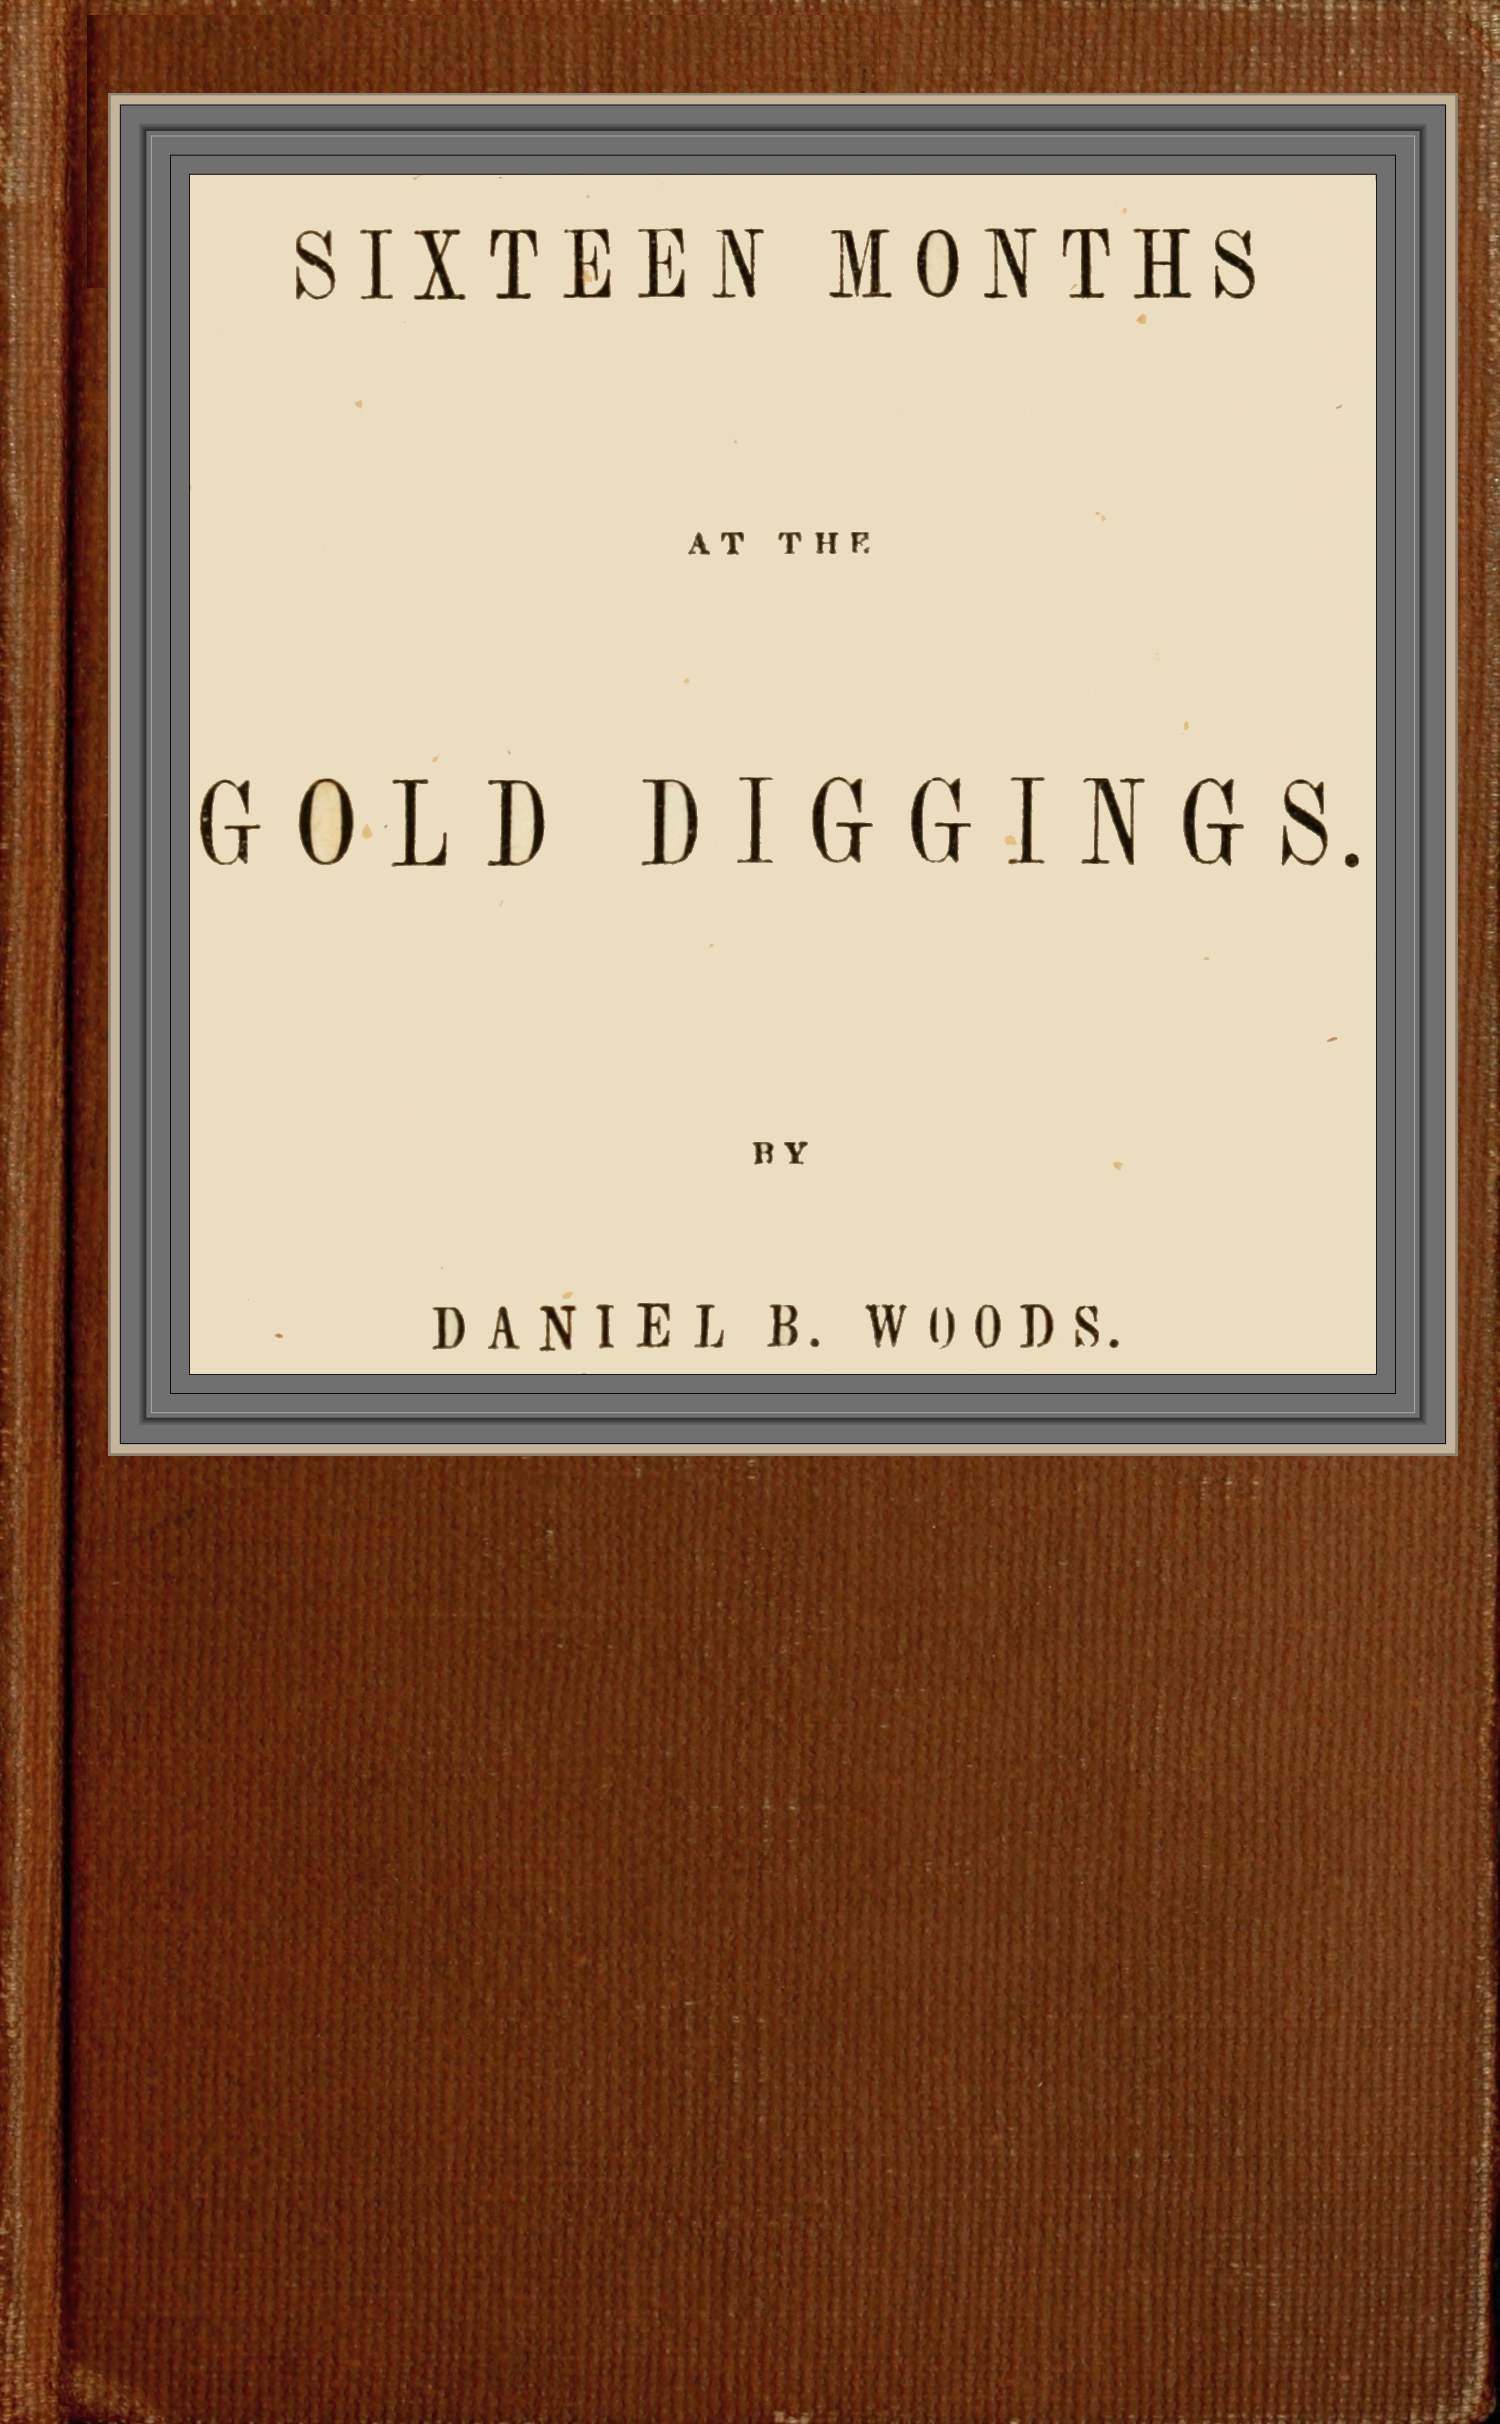 The Project Gutenberg Sixteen at of B. gold the diggings, Daniel months by eBook